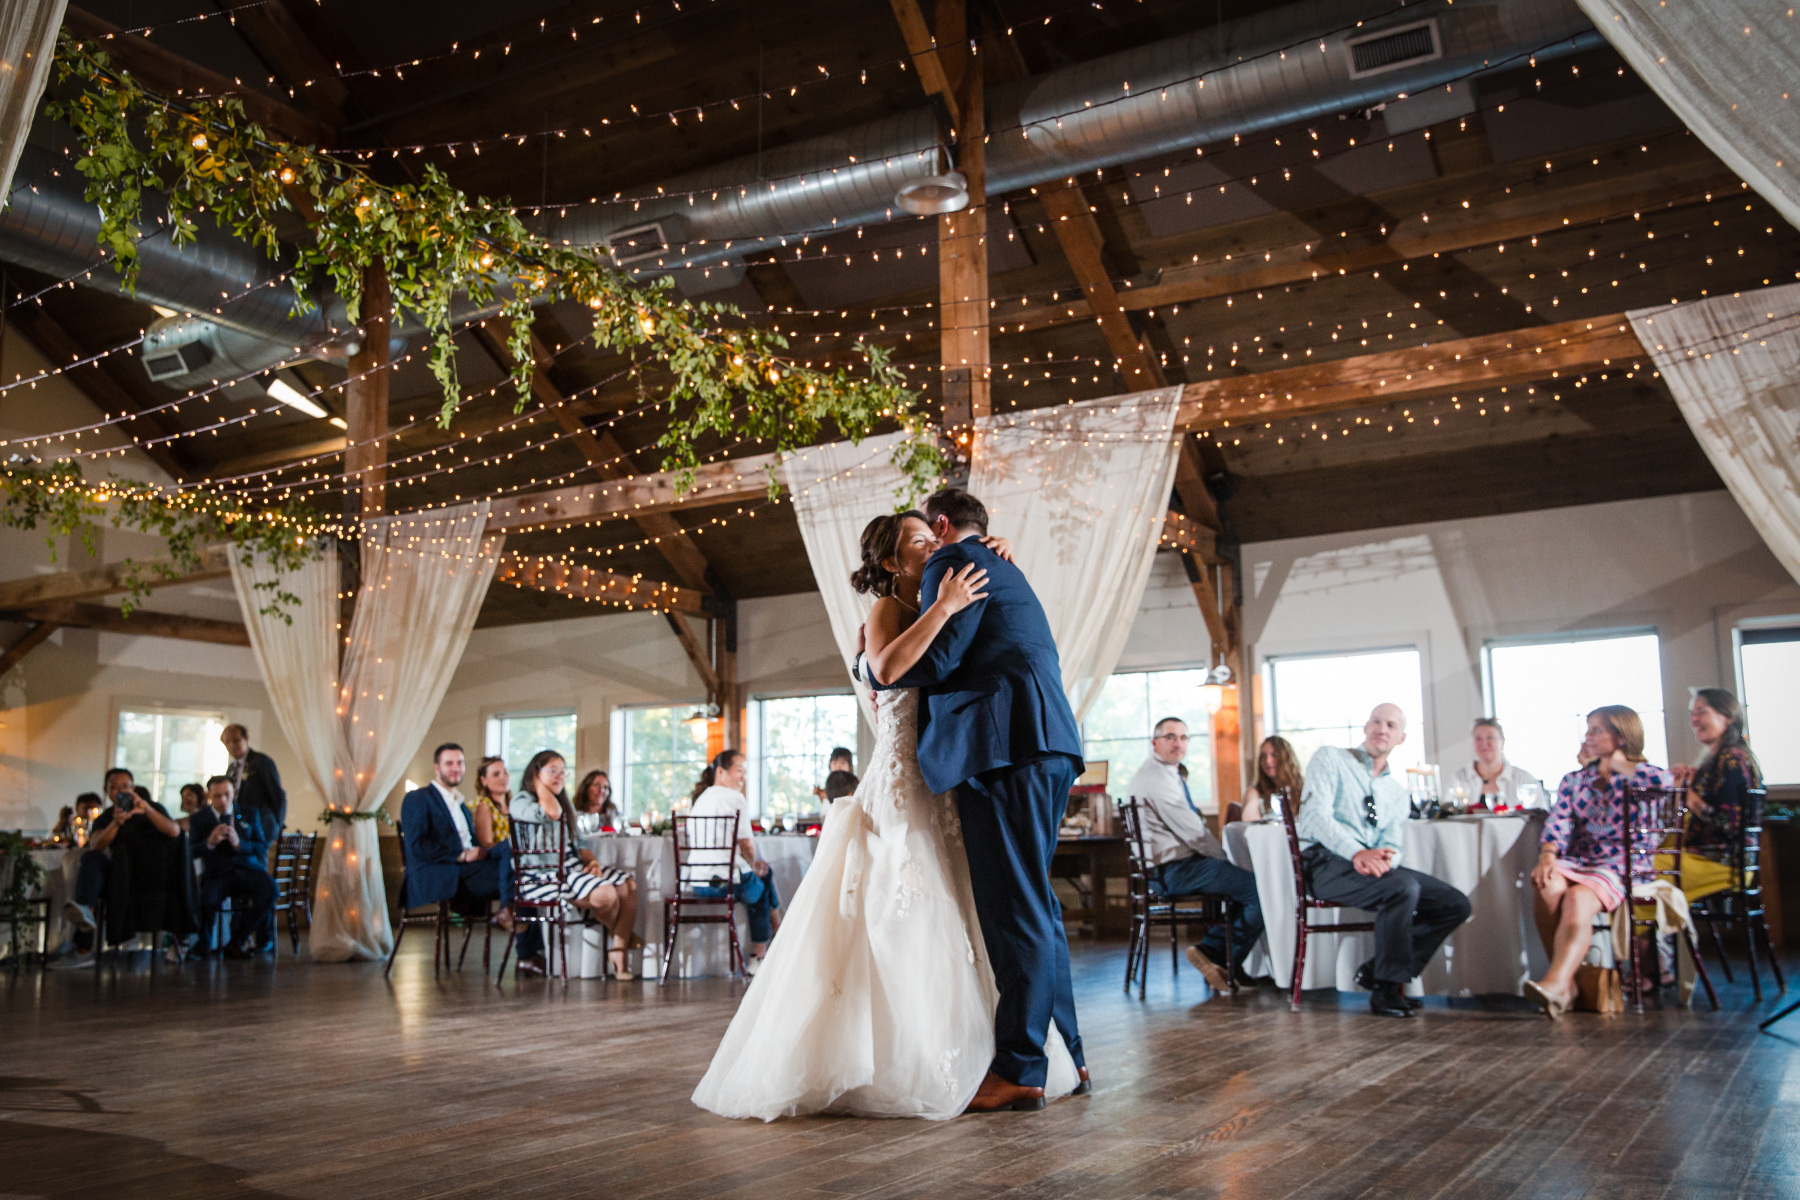 Bride and groom in traditional wedding attire having their first dance as guests in event barn look on.